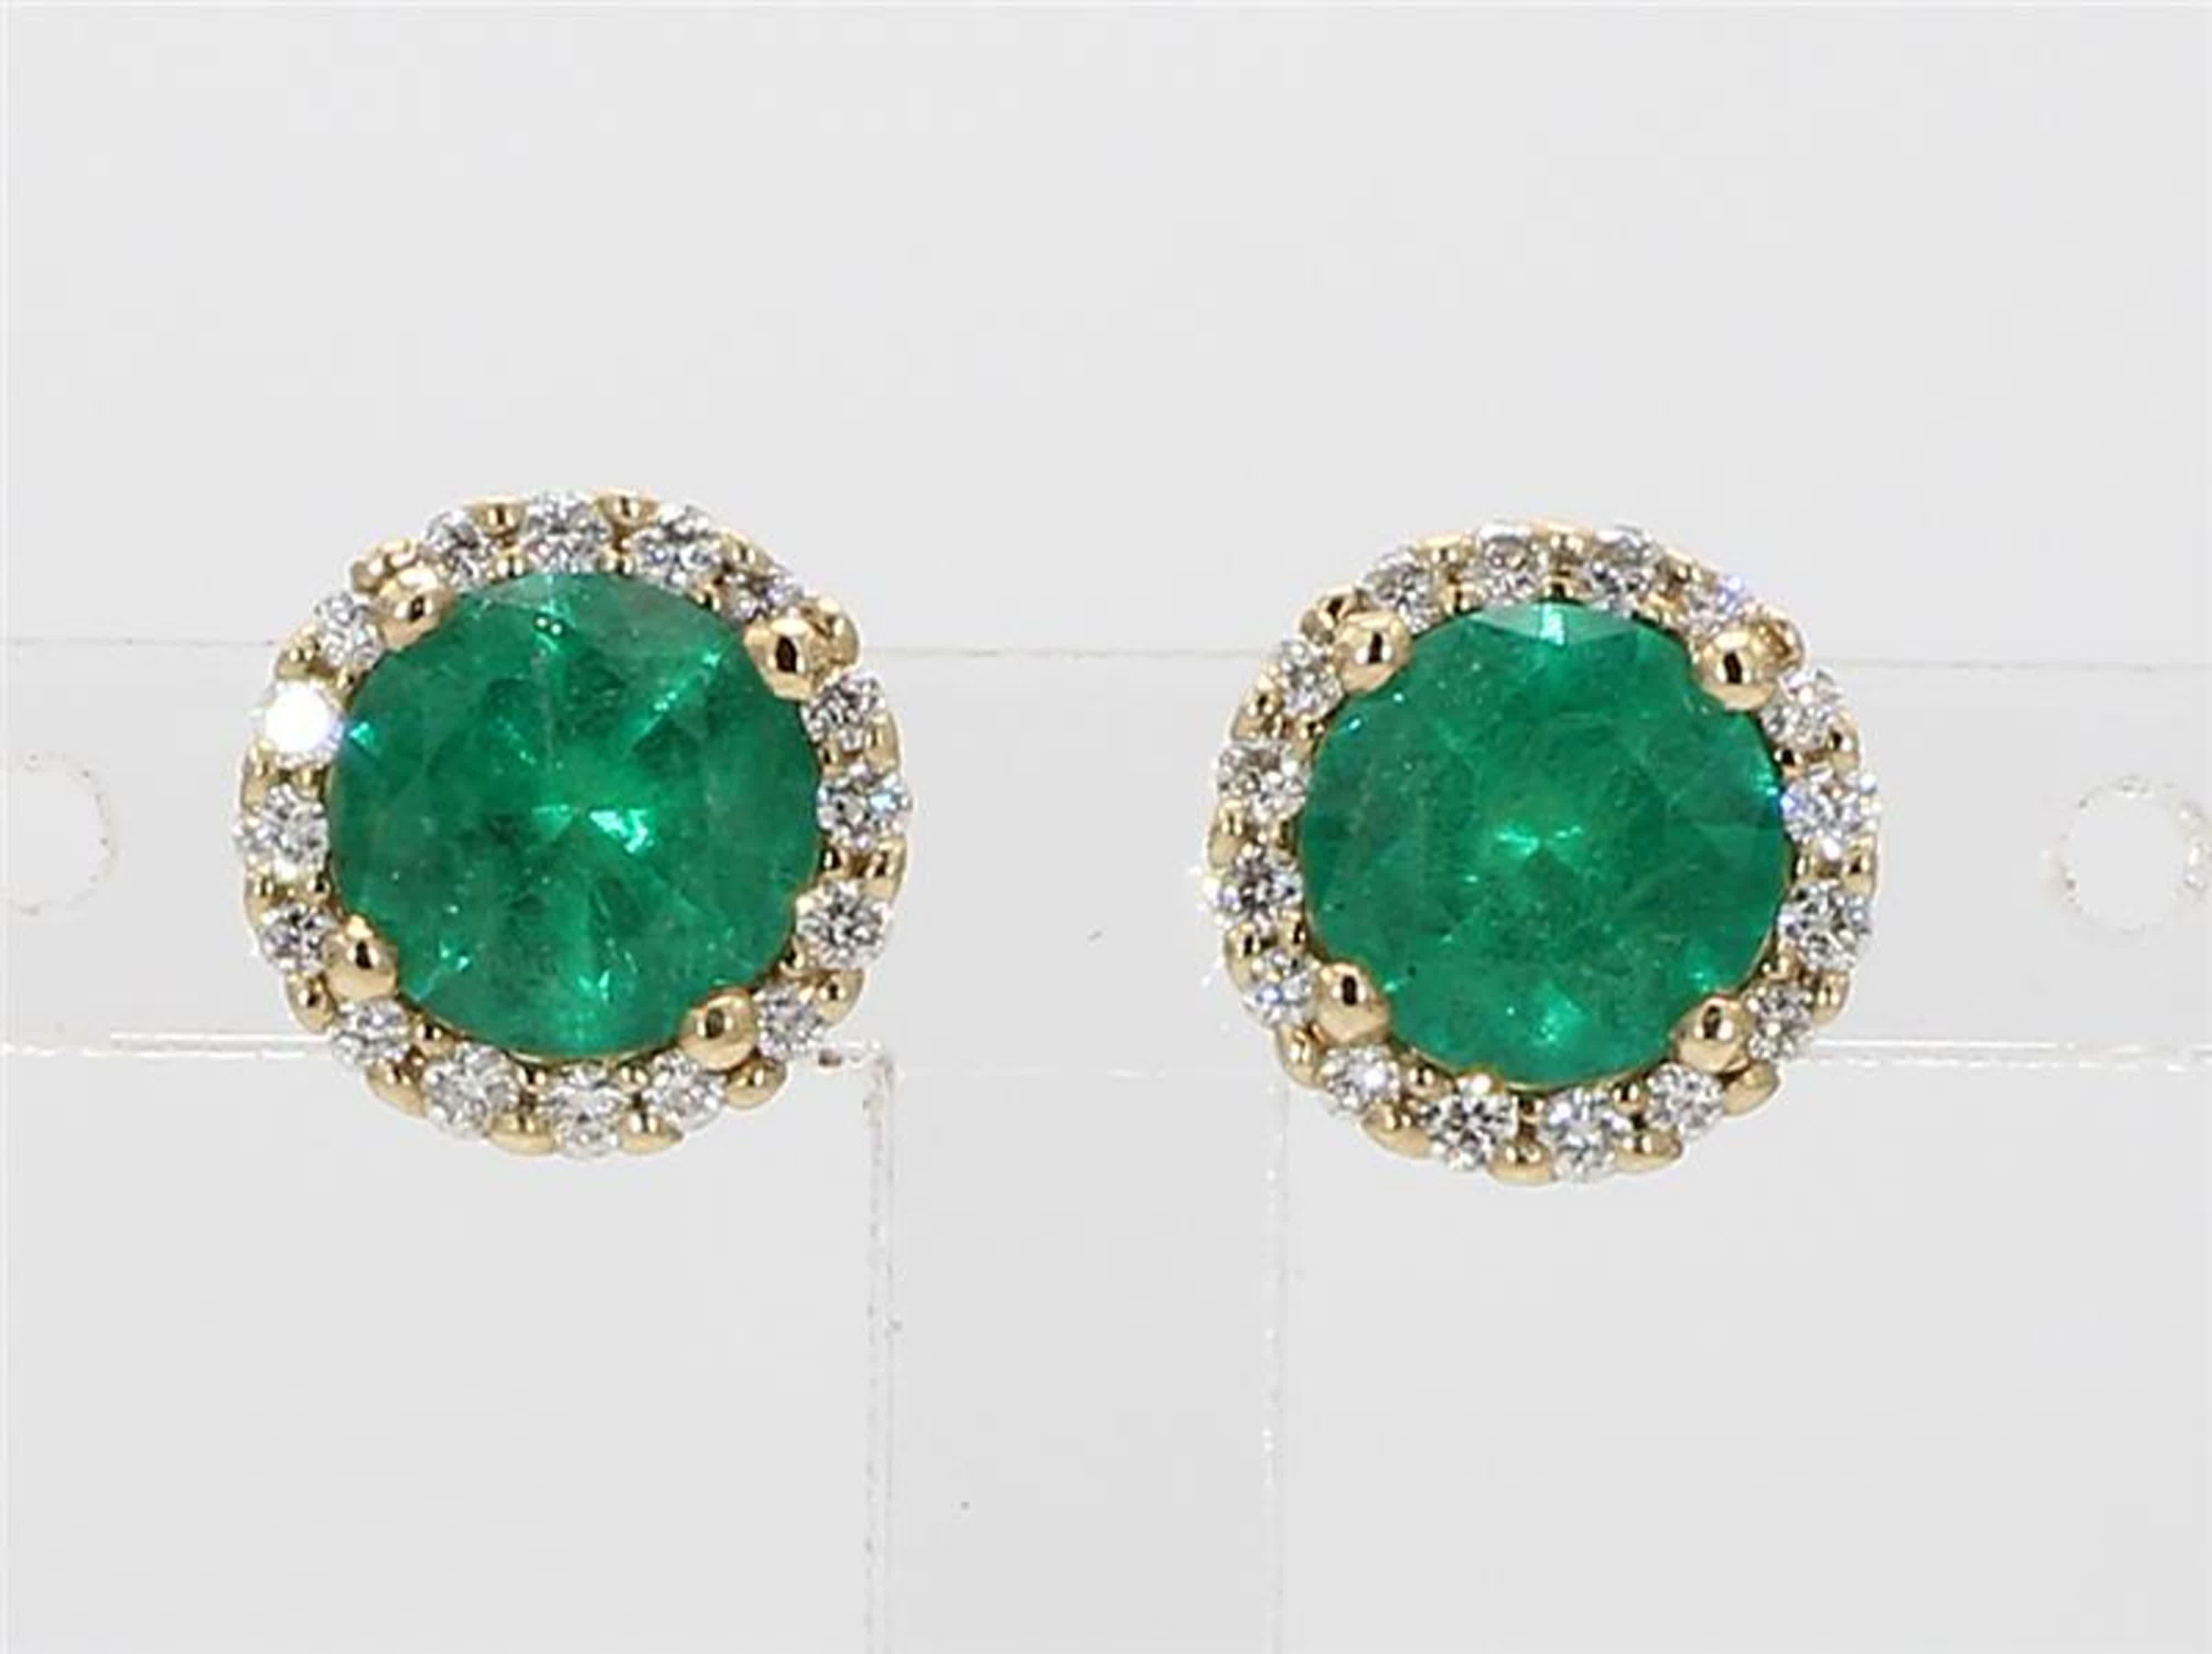 RareGemWorld's classic emerald earrings. Mounted in a beautiful 14K Yellow Gold setting with natural round cut green emerald's. The emerald's are surrounded by natural round white diamond melee. These earrings are guaranteed to impress and enhance